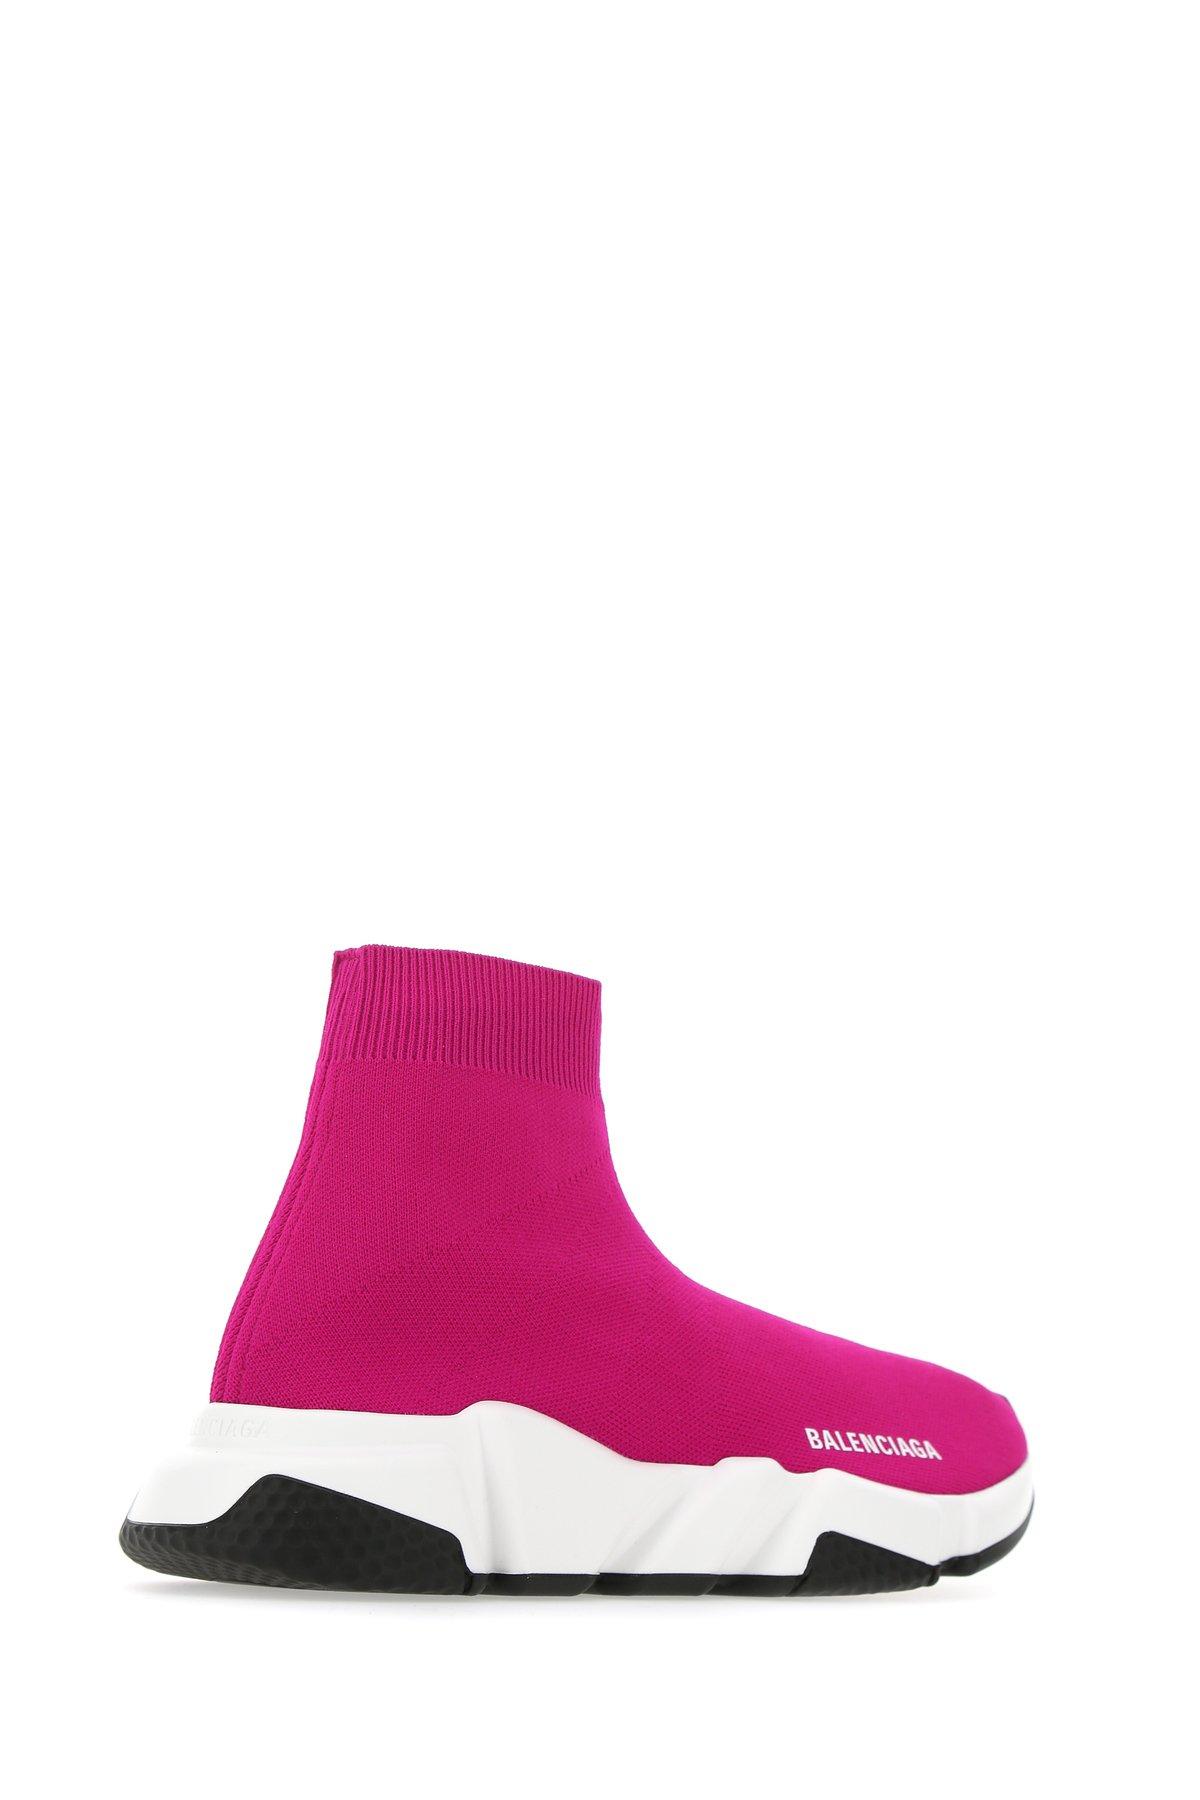 Balenciaga Synthetic Women's Speed Knitted High-top Trainers in Pink - Save  63% | Lyst